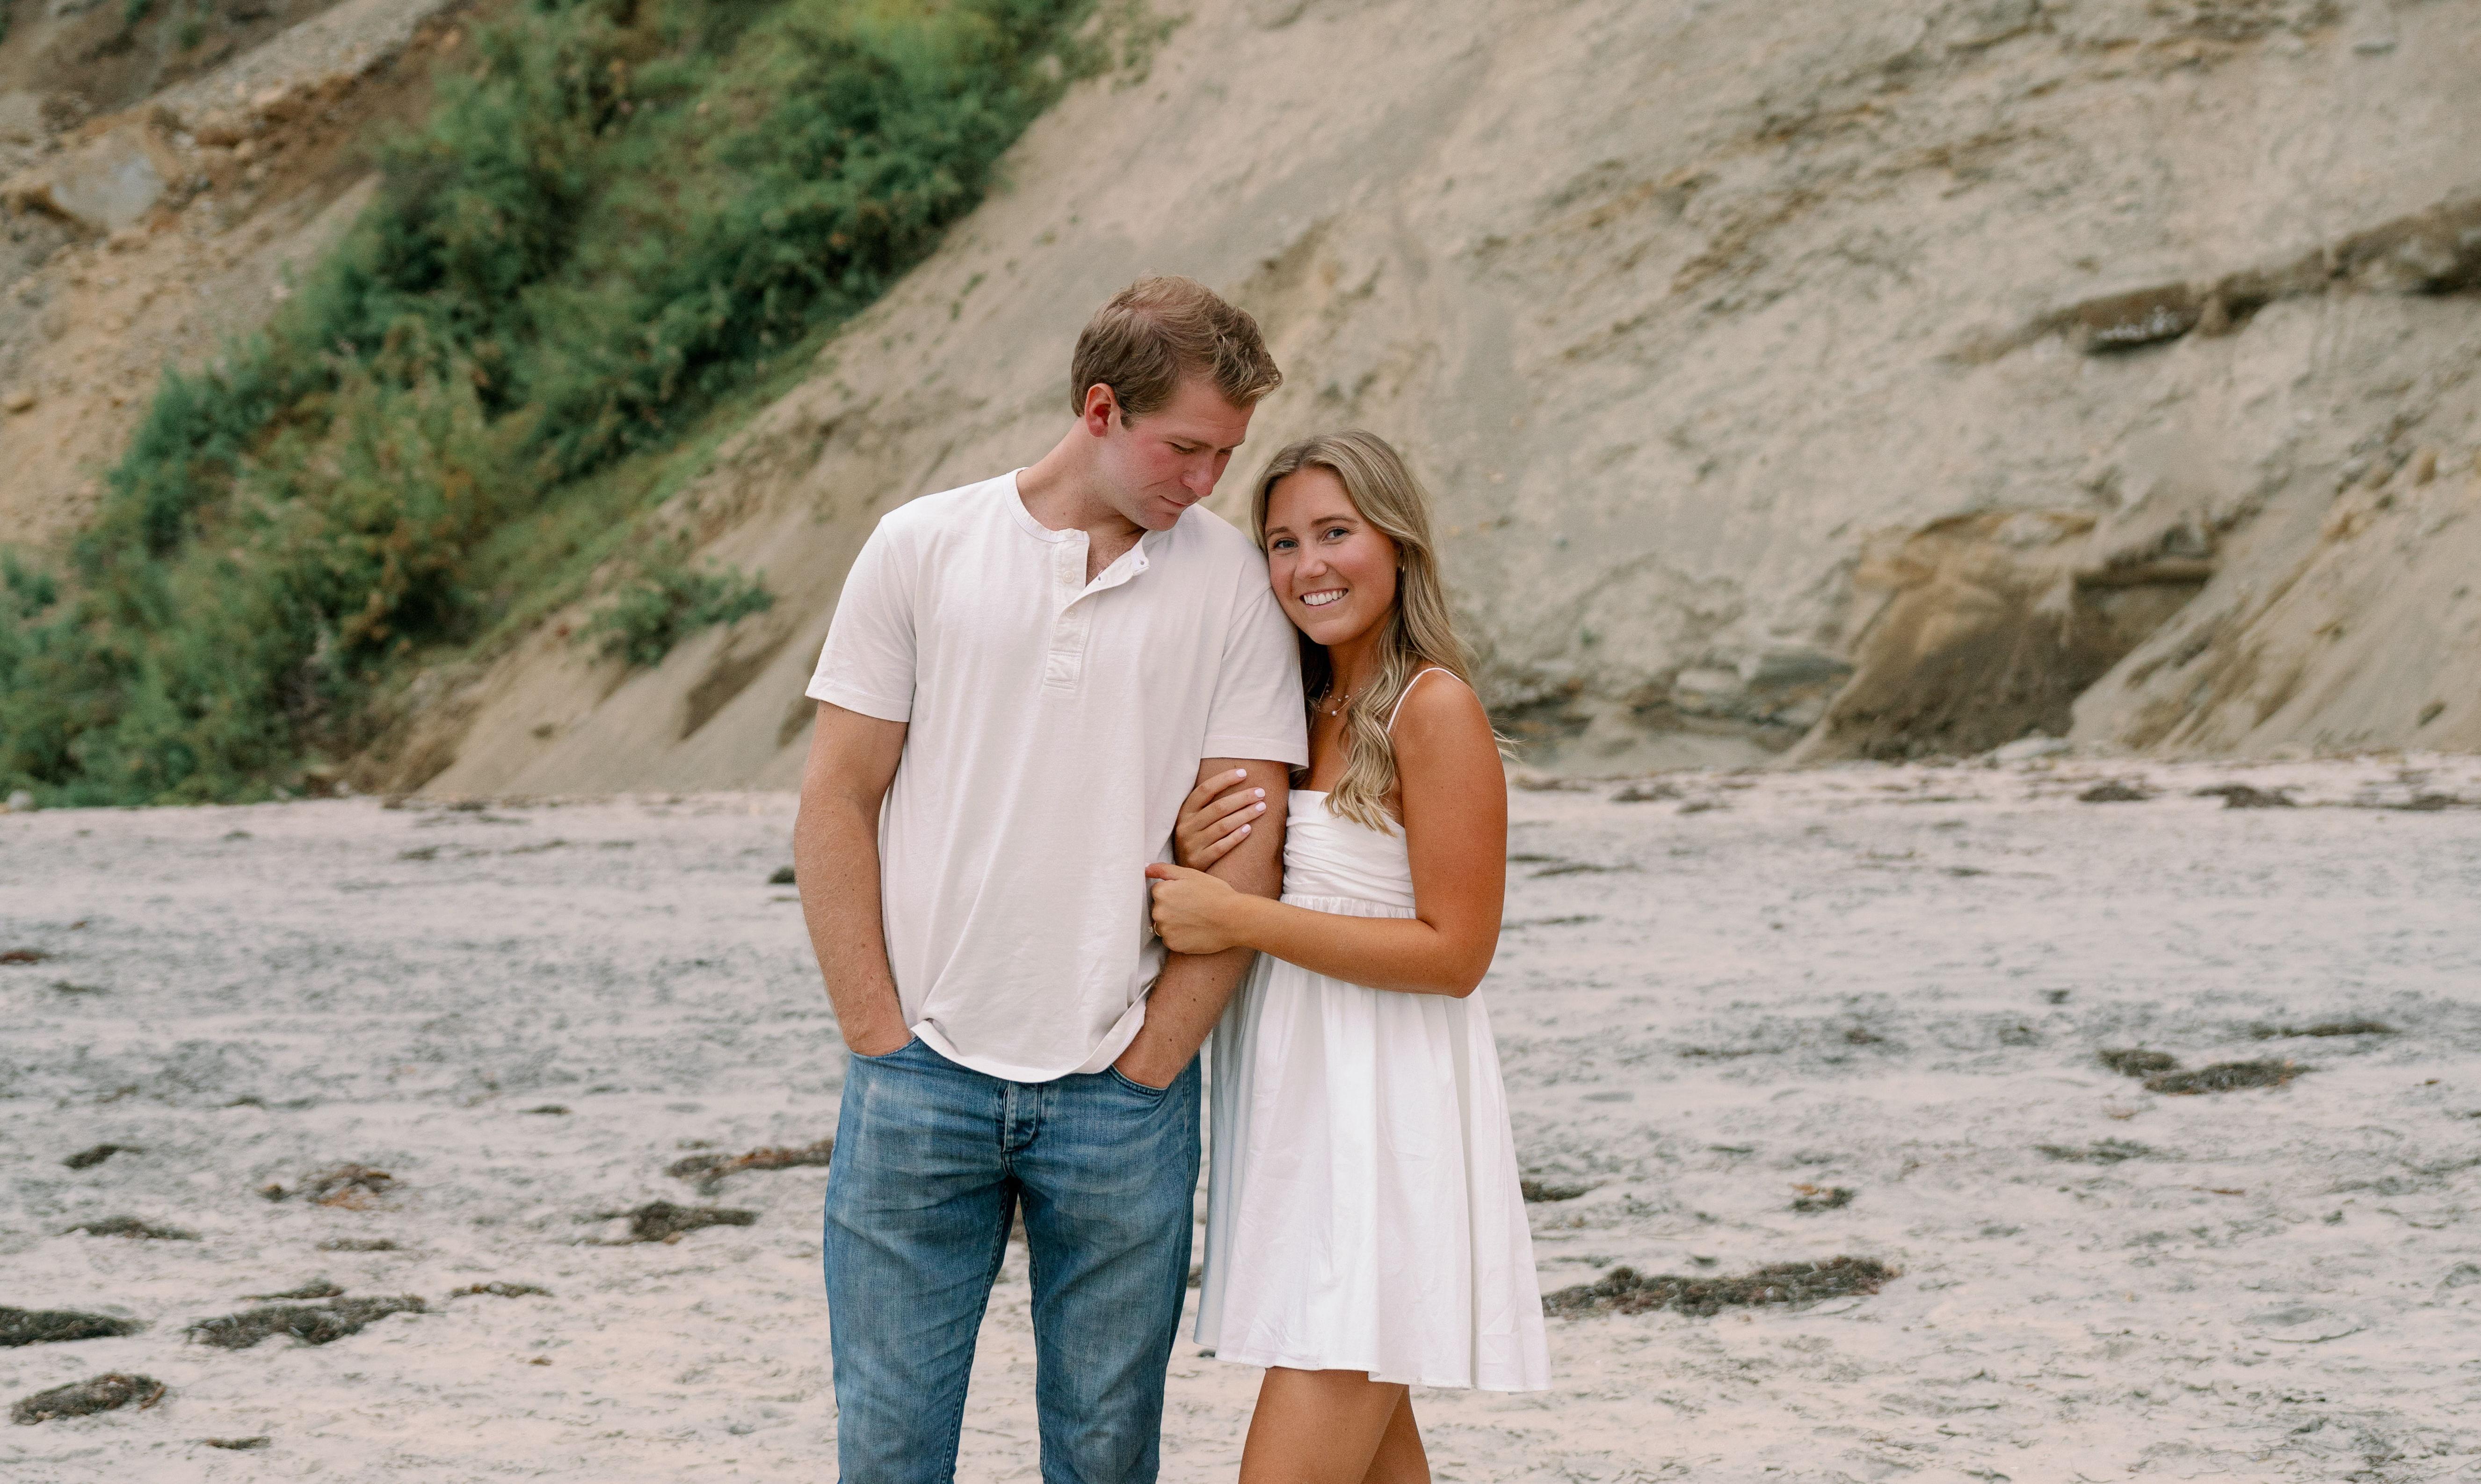 The Wedding Website of Annika Berg and Riley Plant